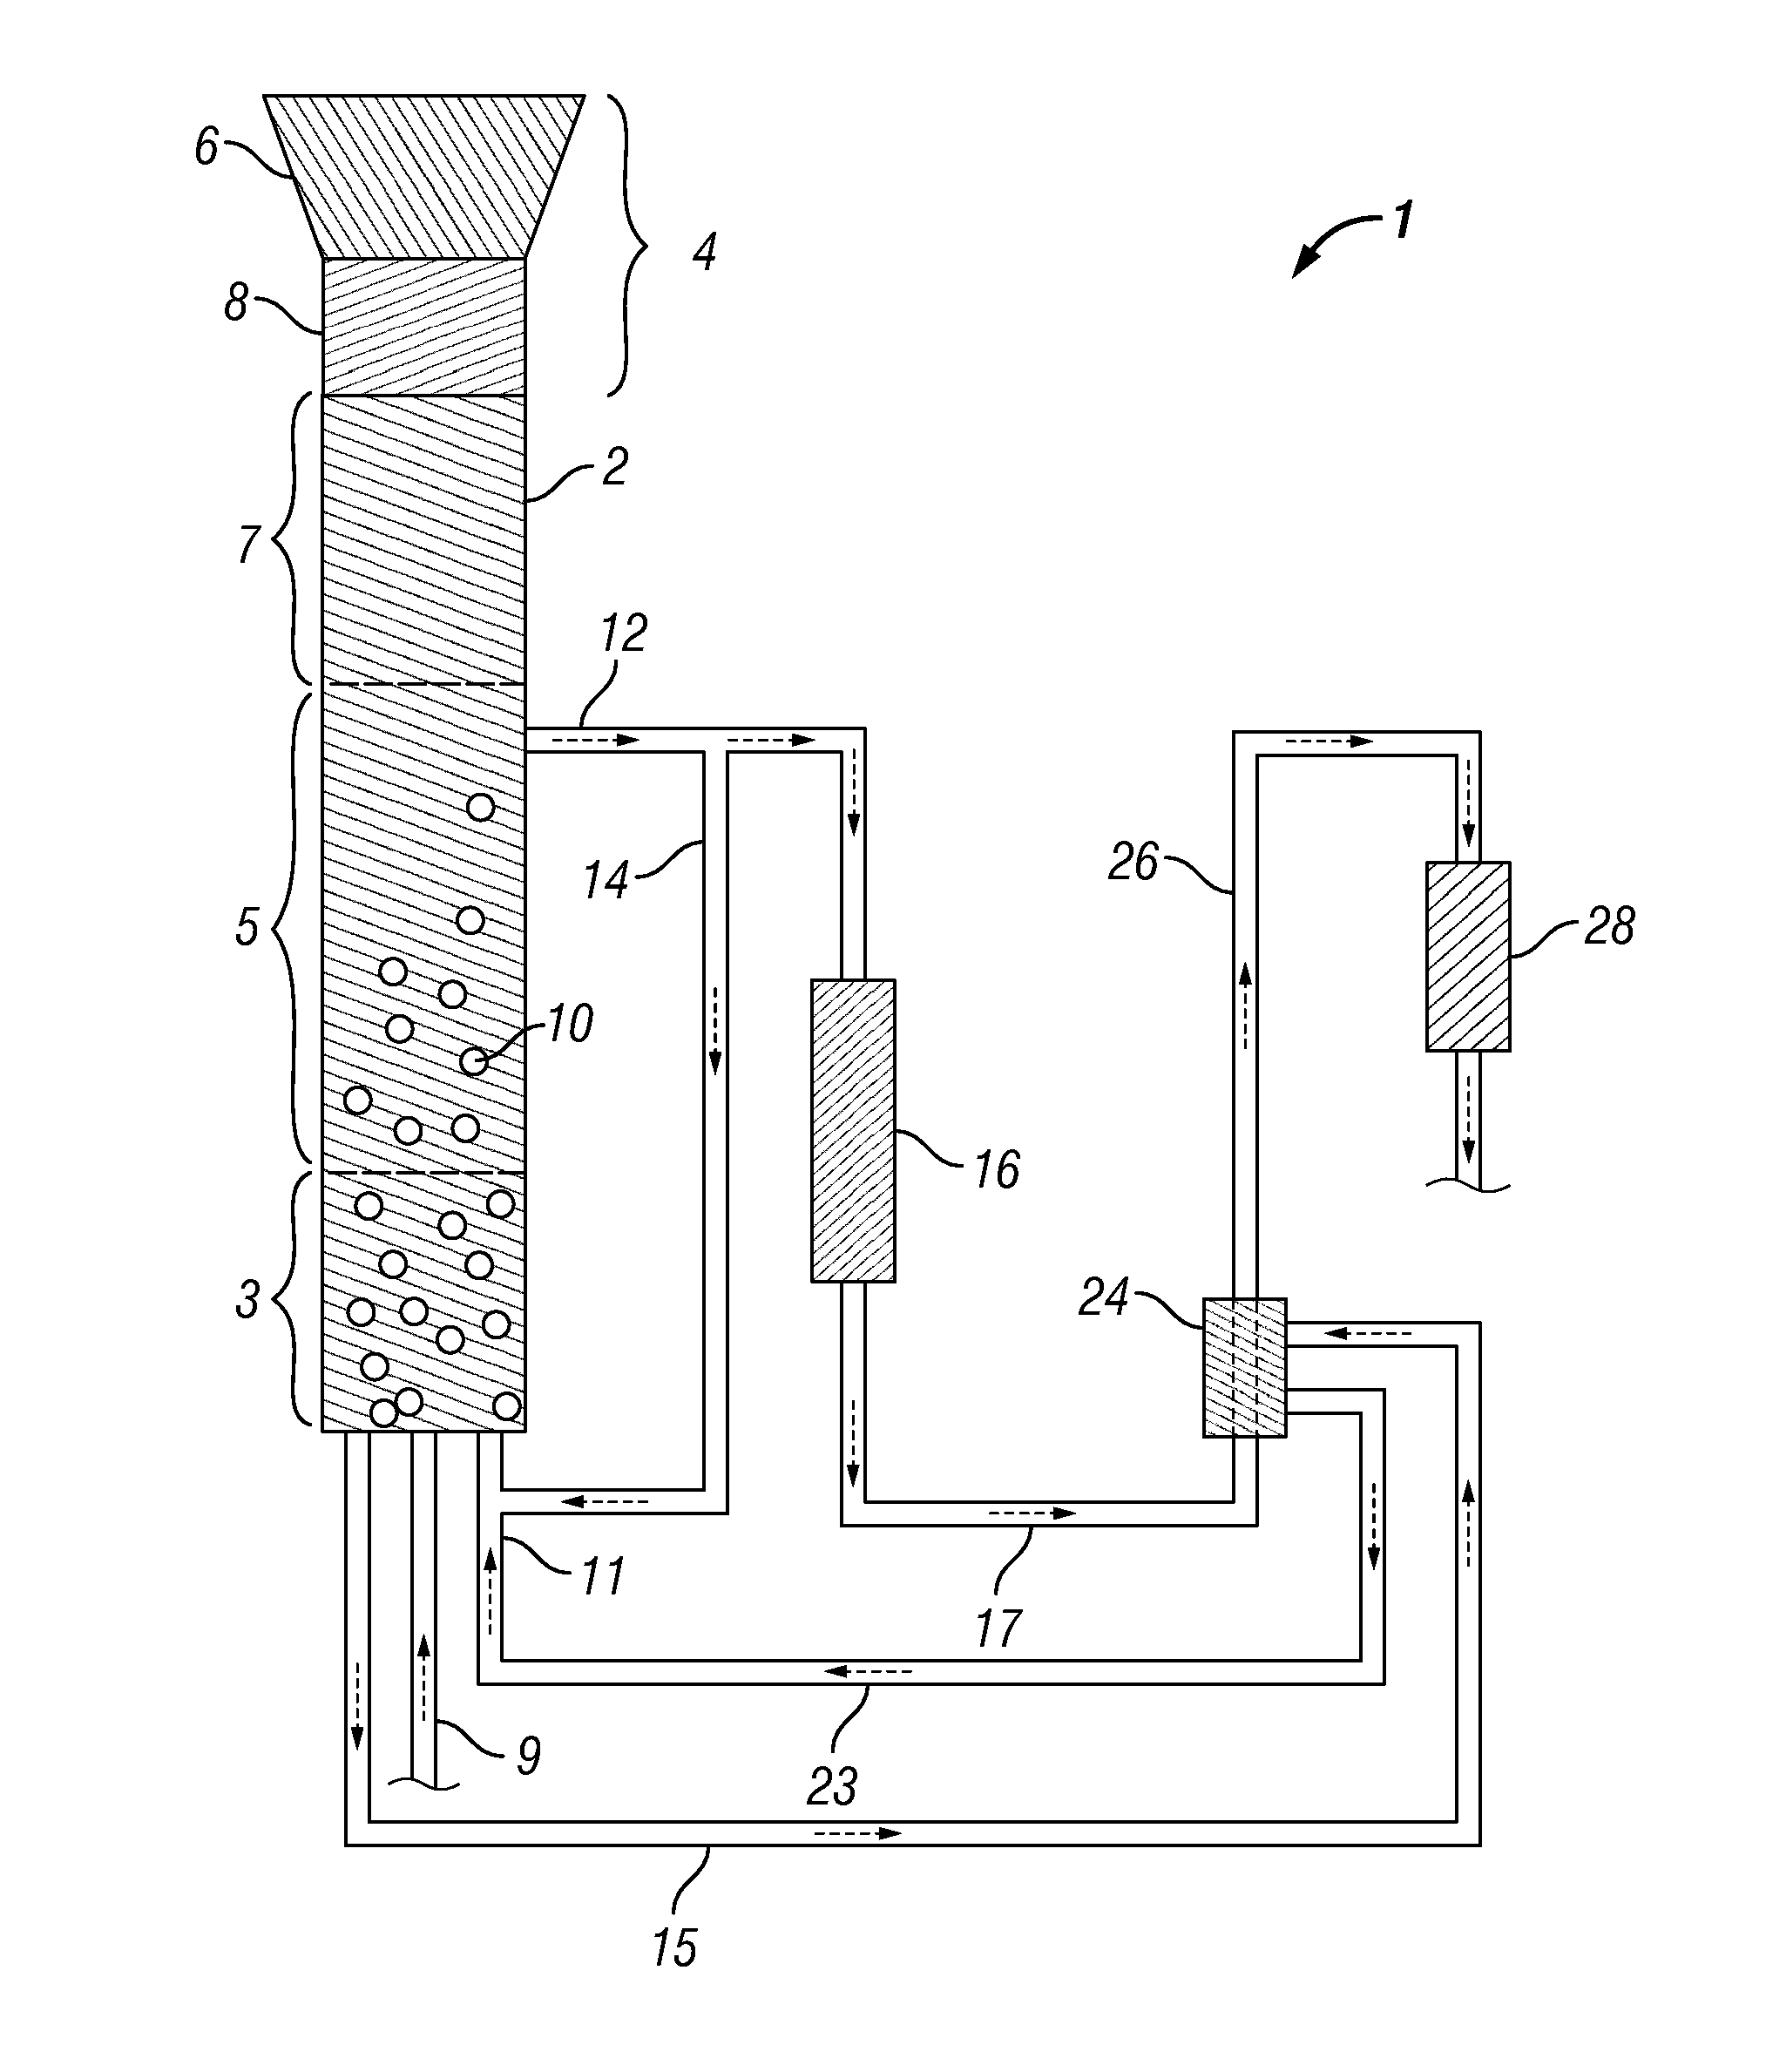 Method and Systems for Procesing Lignin During Hydrothermal Digestion of Cellulosic Biomass Solids While Producing a Monohydric Alcohol Feed